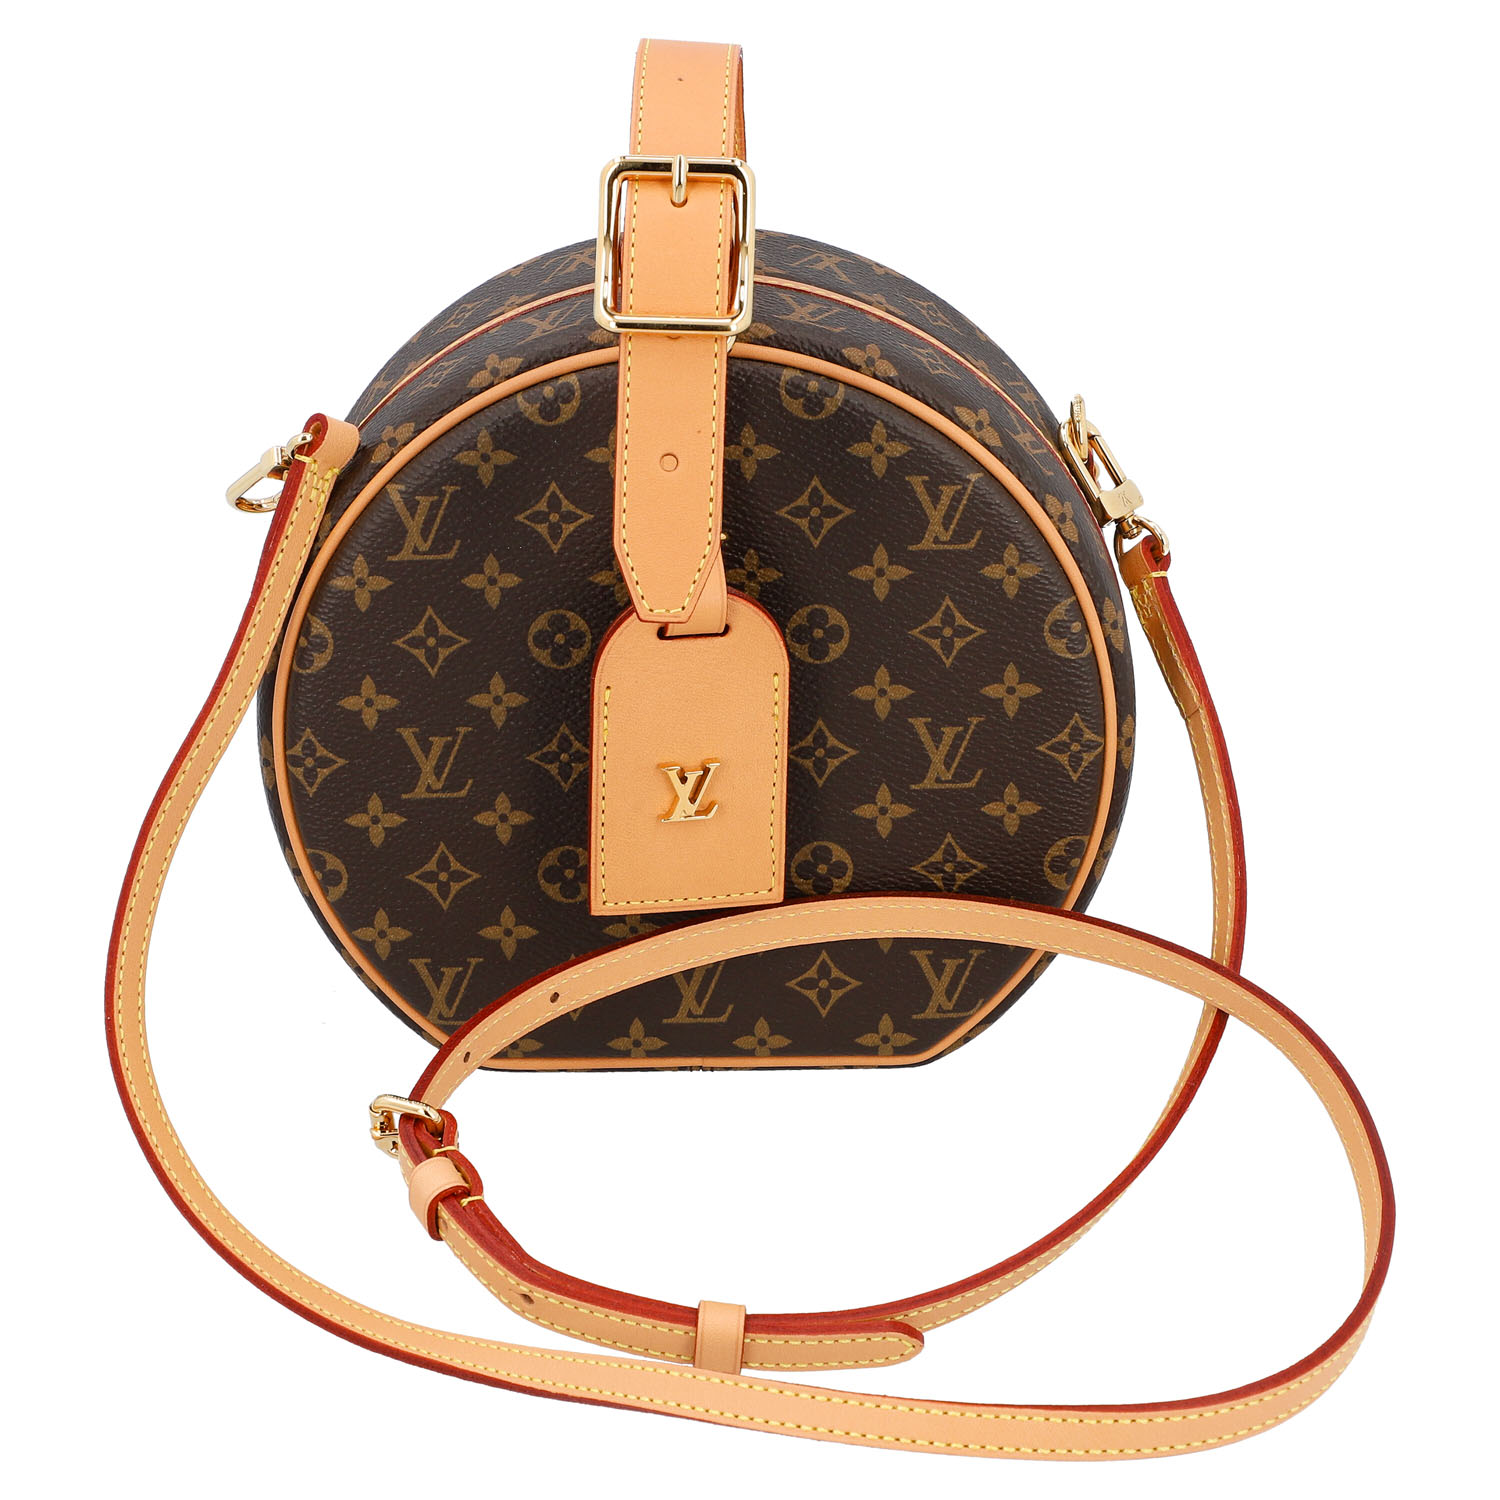 Buy Louis Vuitton Cups Online In India -  India